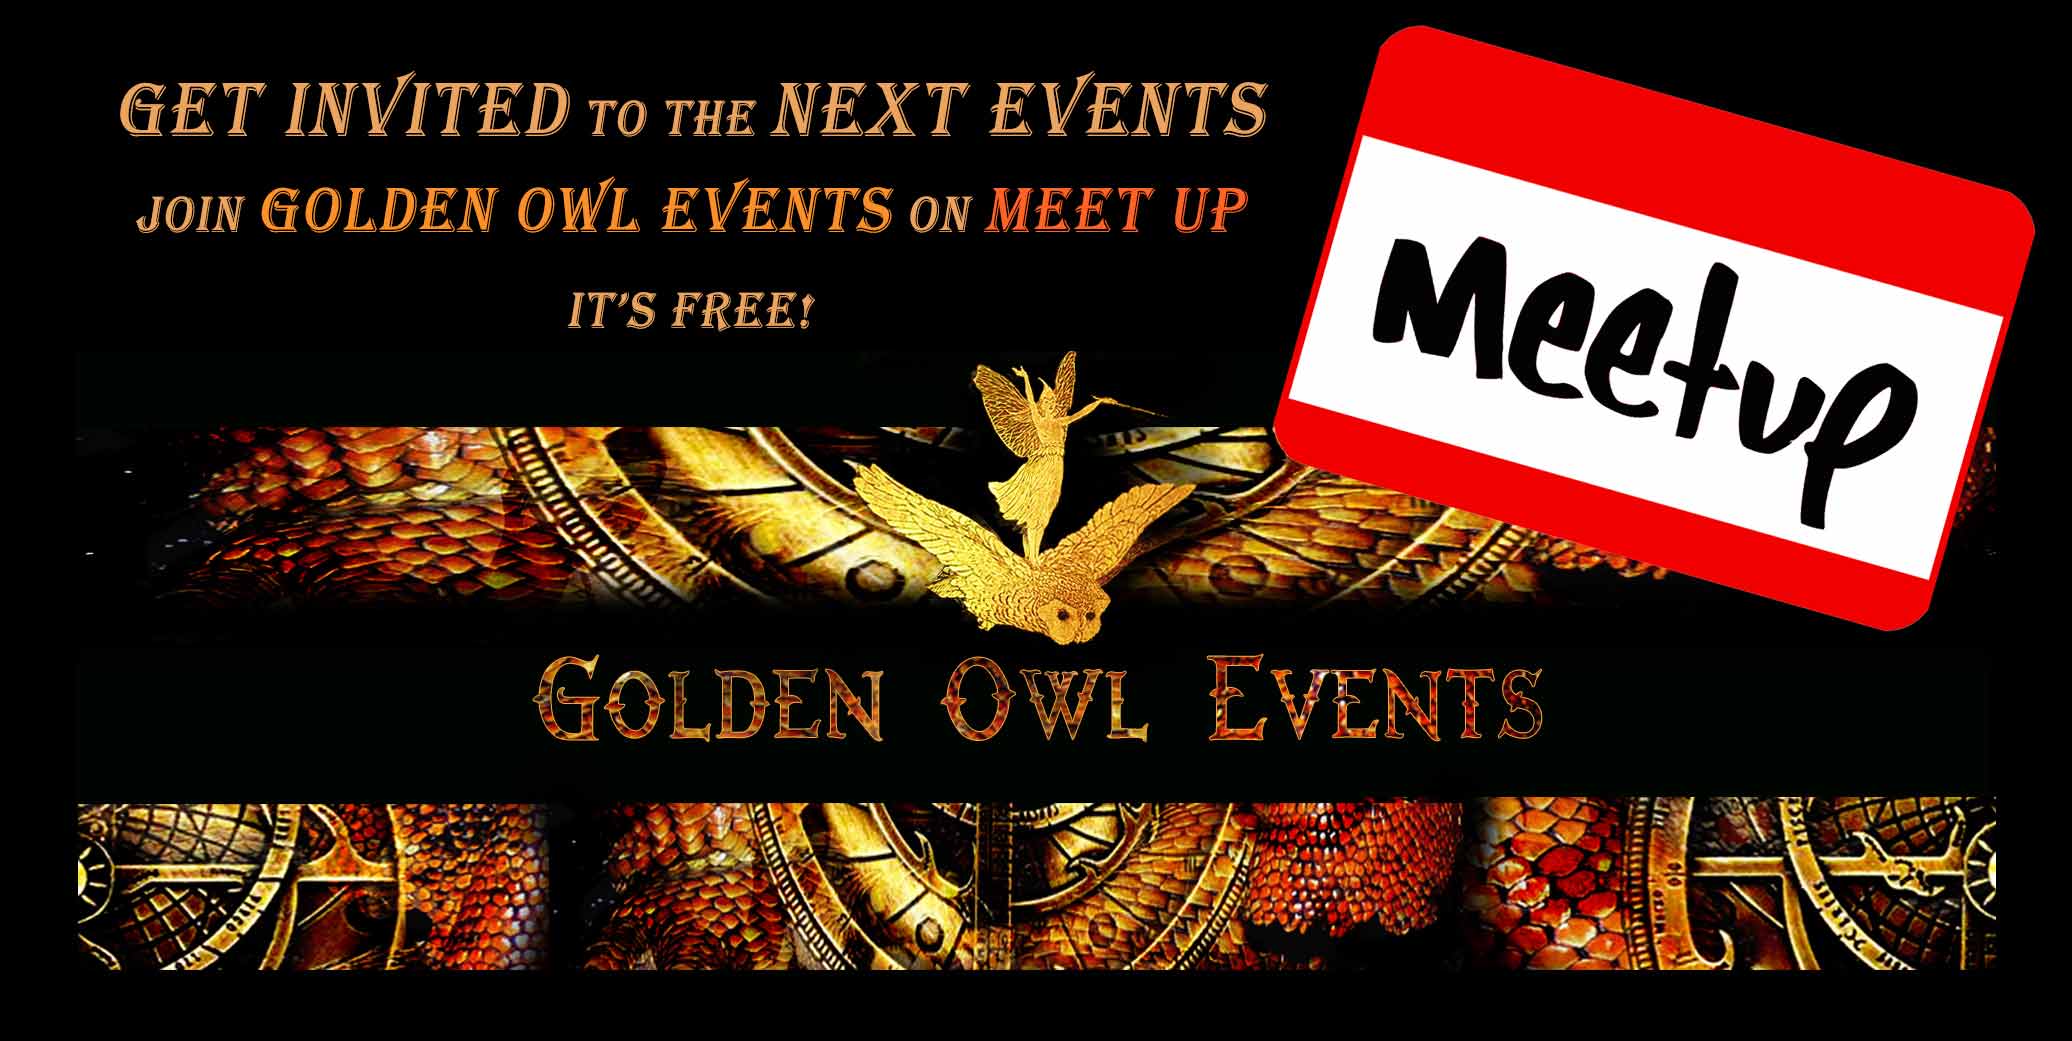 Join Golden Owl Events on Meet Up - It's Free